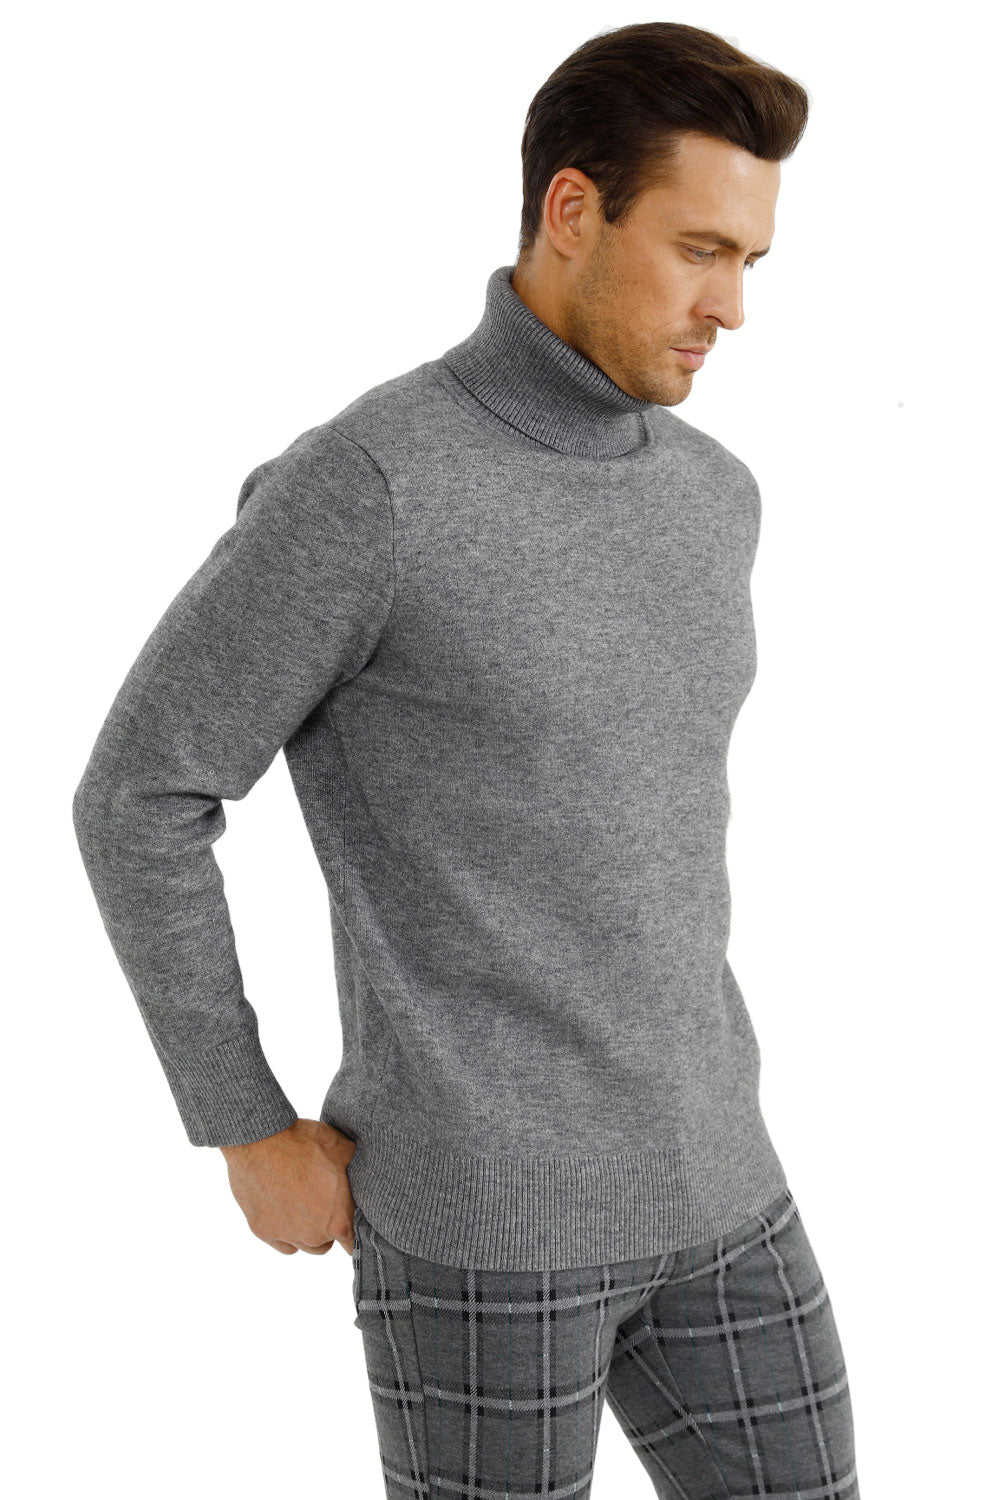 Gingtto Men's Turtleneck Sweater: Elevate Your Style and Warmth